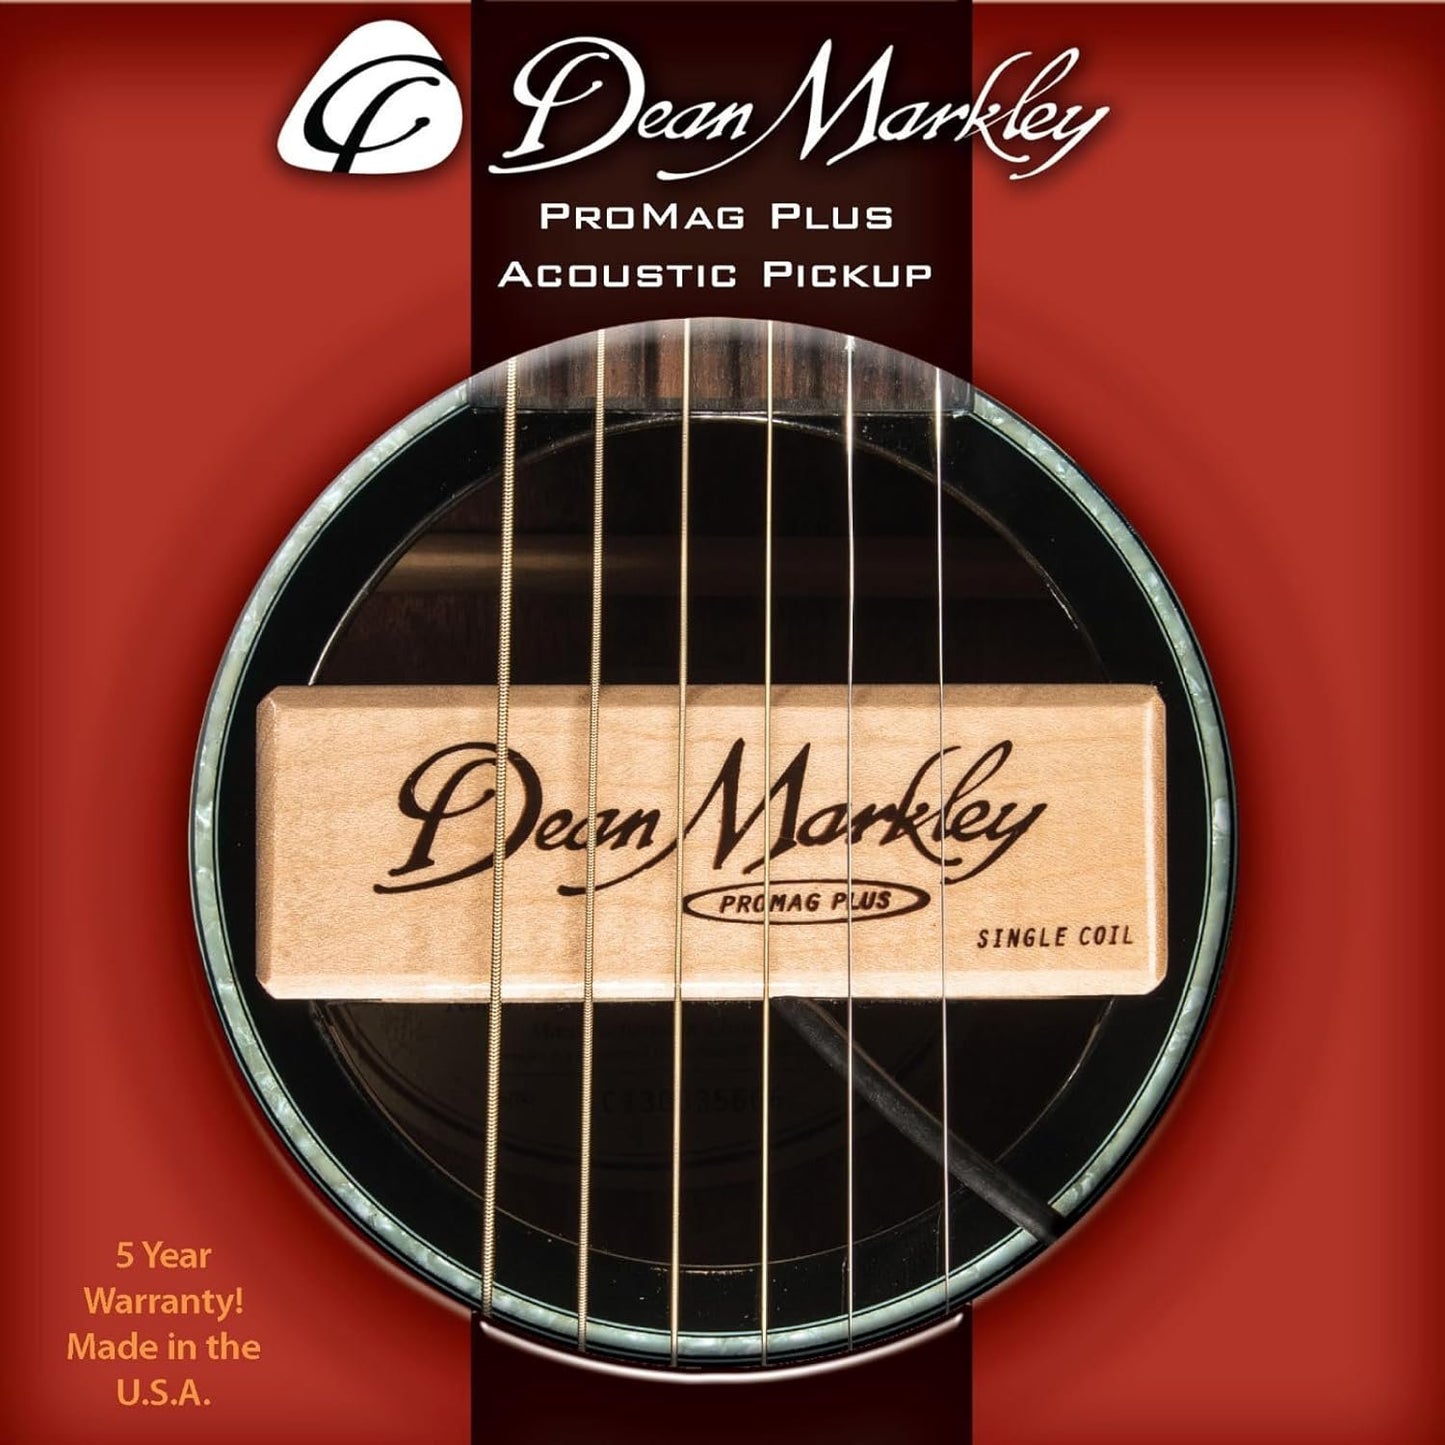 Dean Markley Pro Mag Plus Acoustic Guitar Single Coil Pickup, Smooth Maple Wood Design Active Soundhole Pickup Ebony Finish, Perfect String Balance and 15 Ft Low Noise for Steel-String Guitars